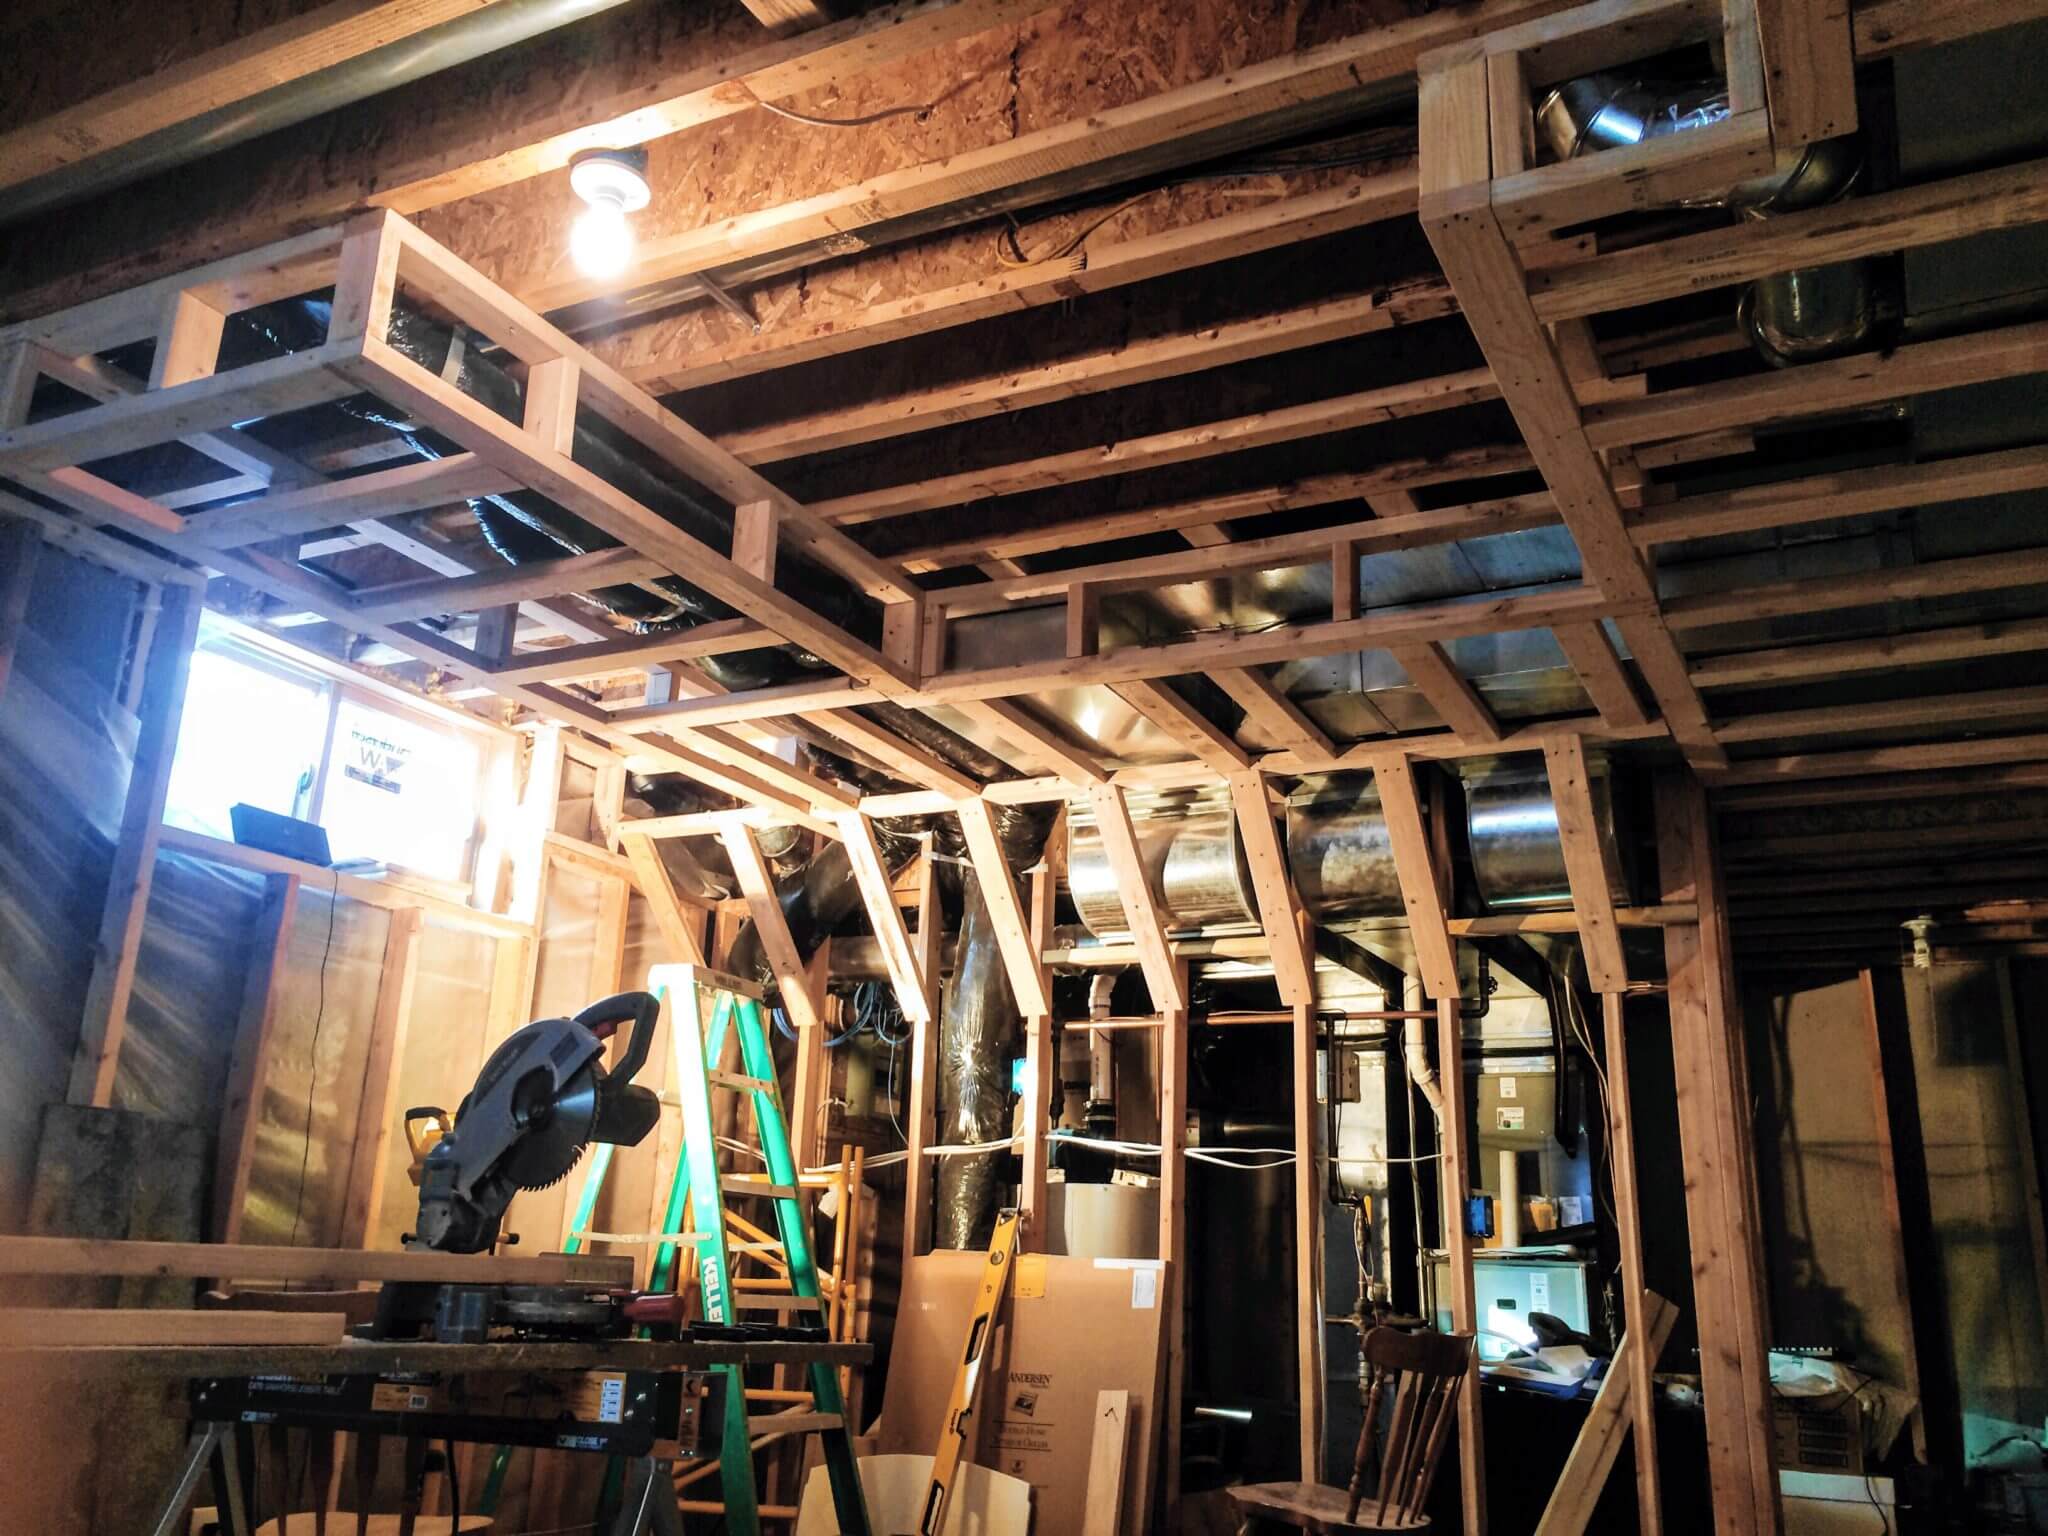 Some of the more complicated soffit framing